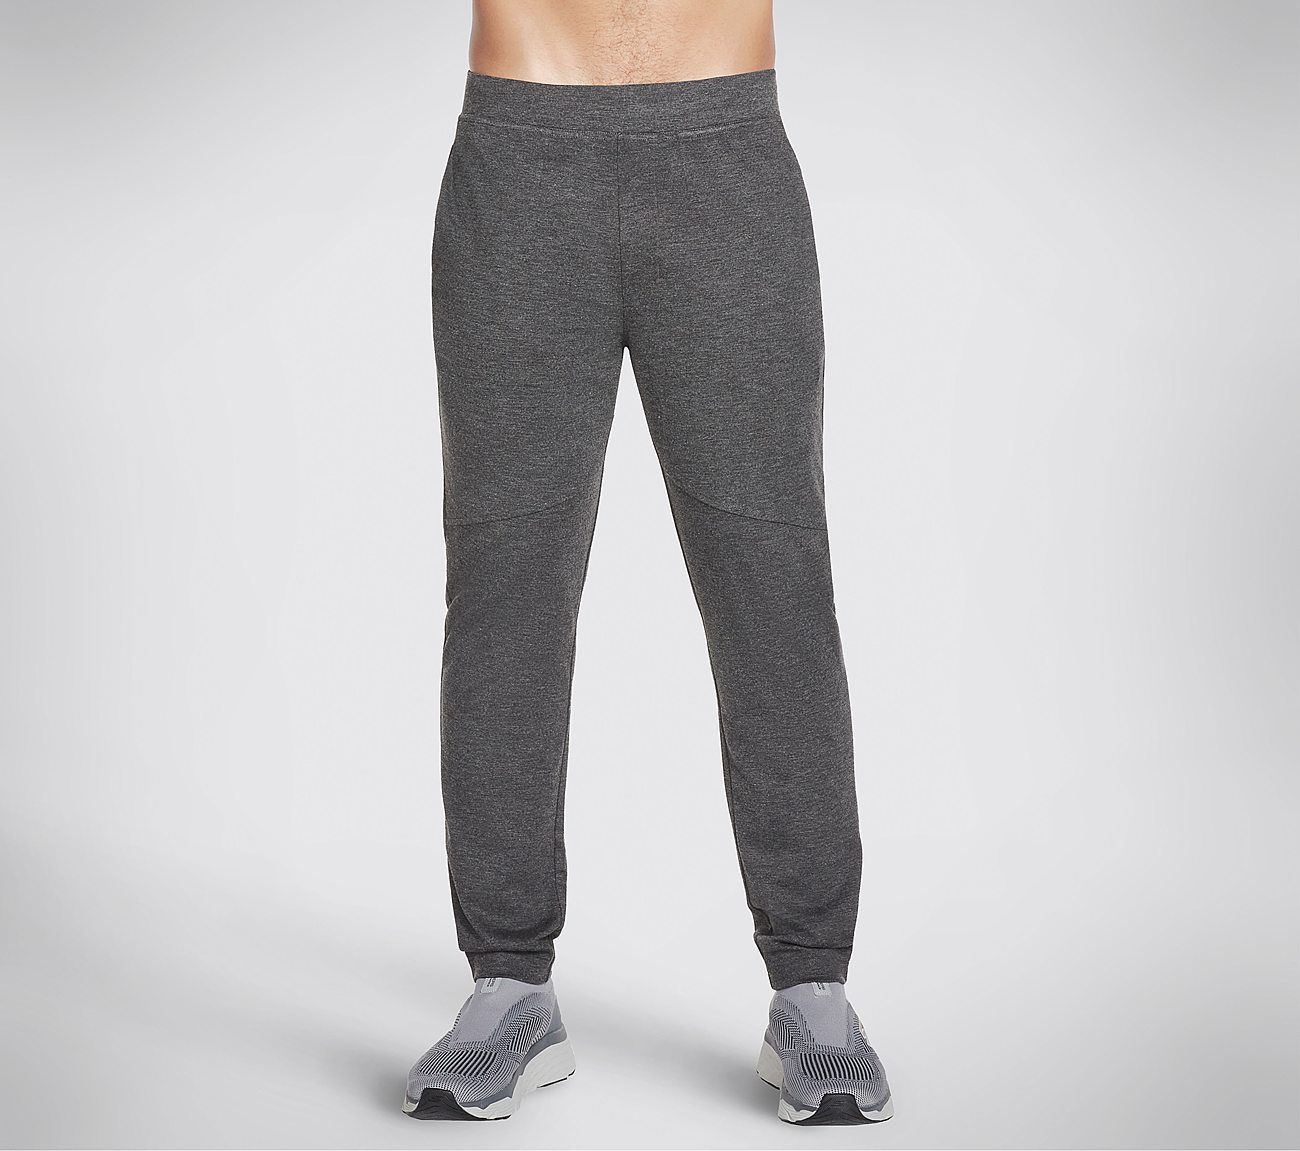 GOKNIT ULTRA PANT, CCHARCOAL Apparels Lateral View